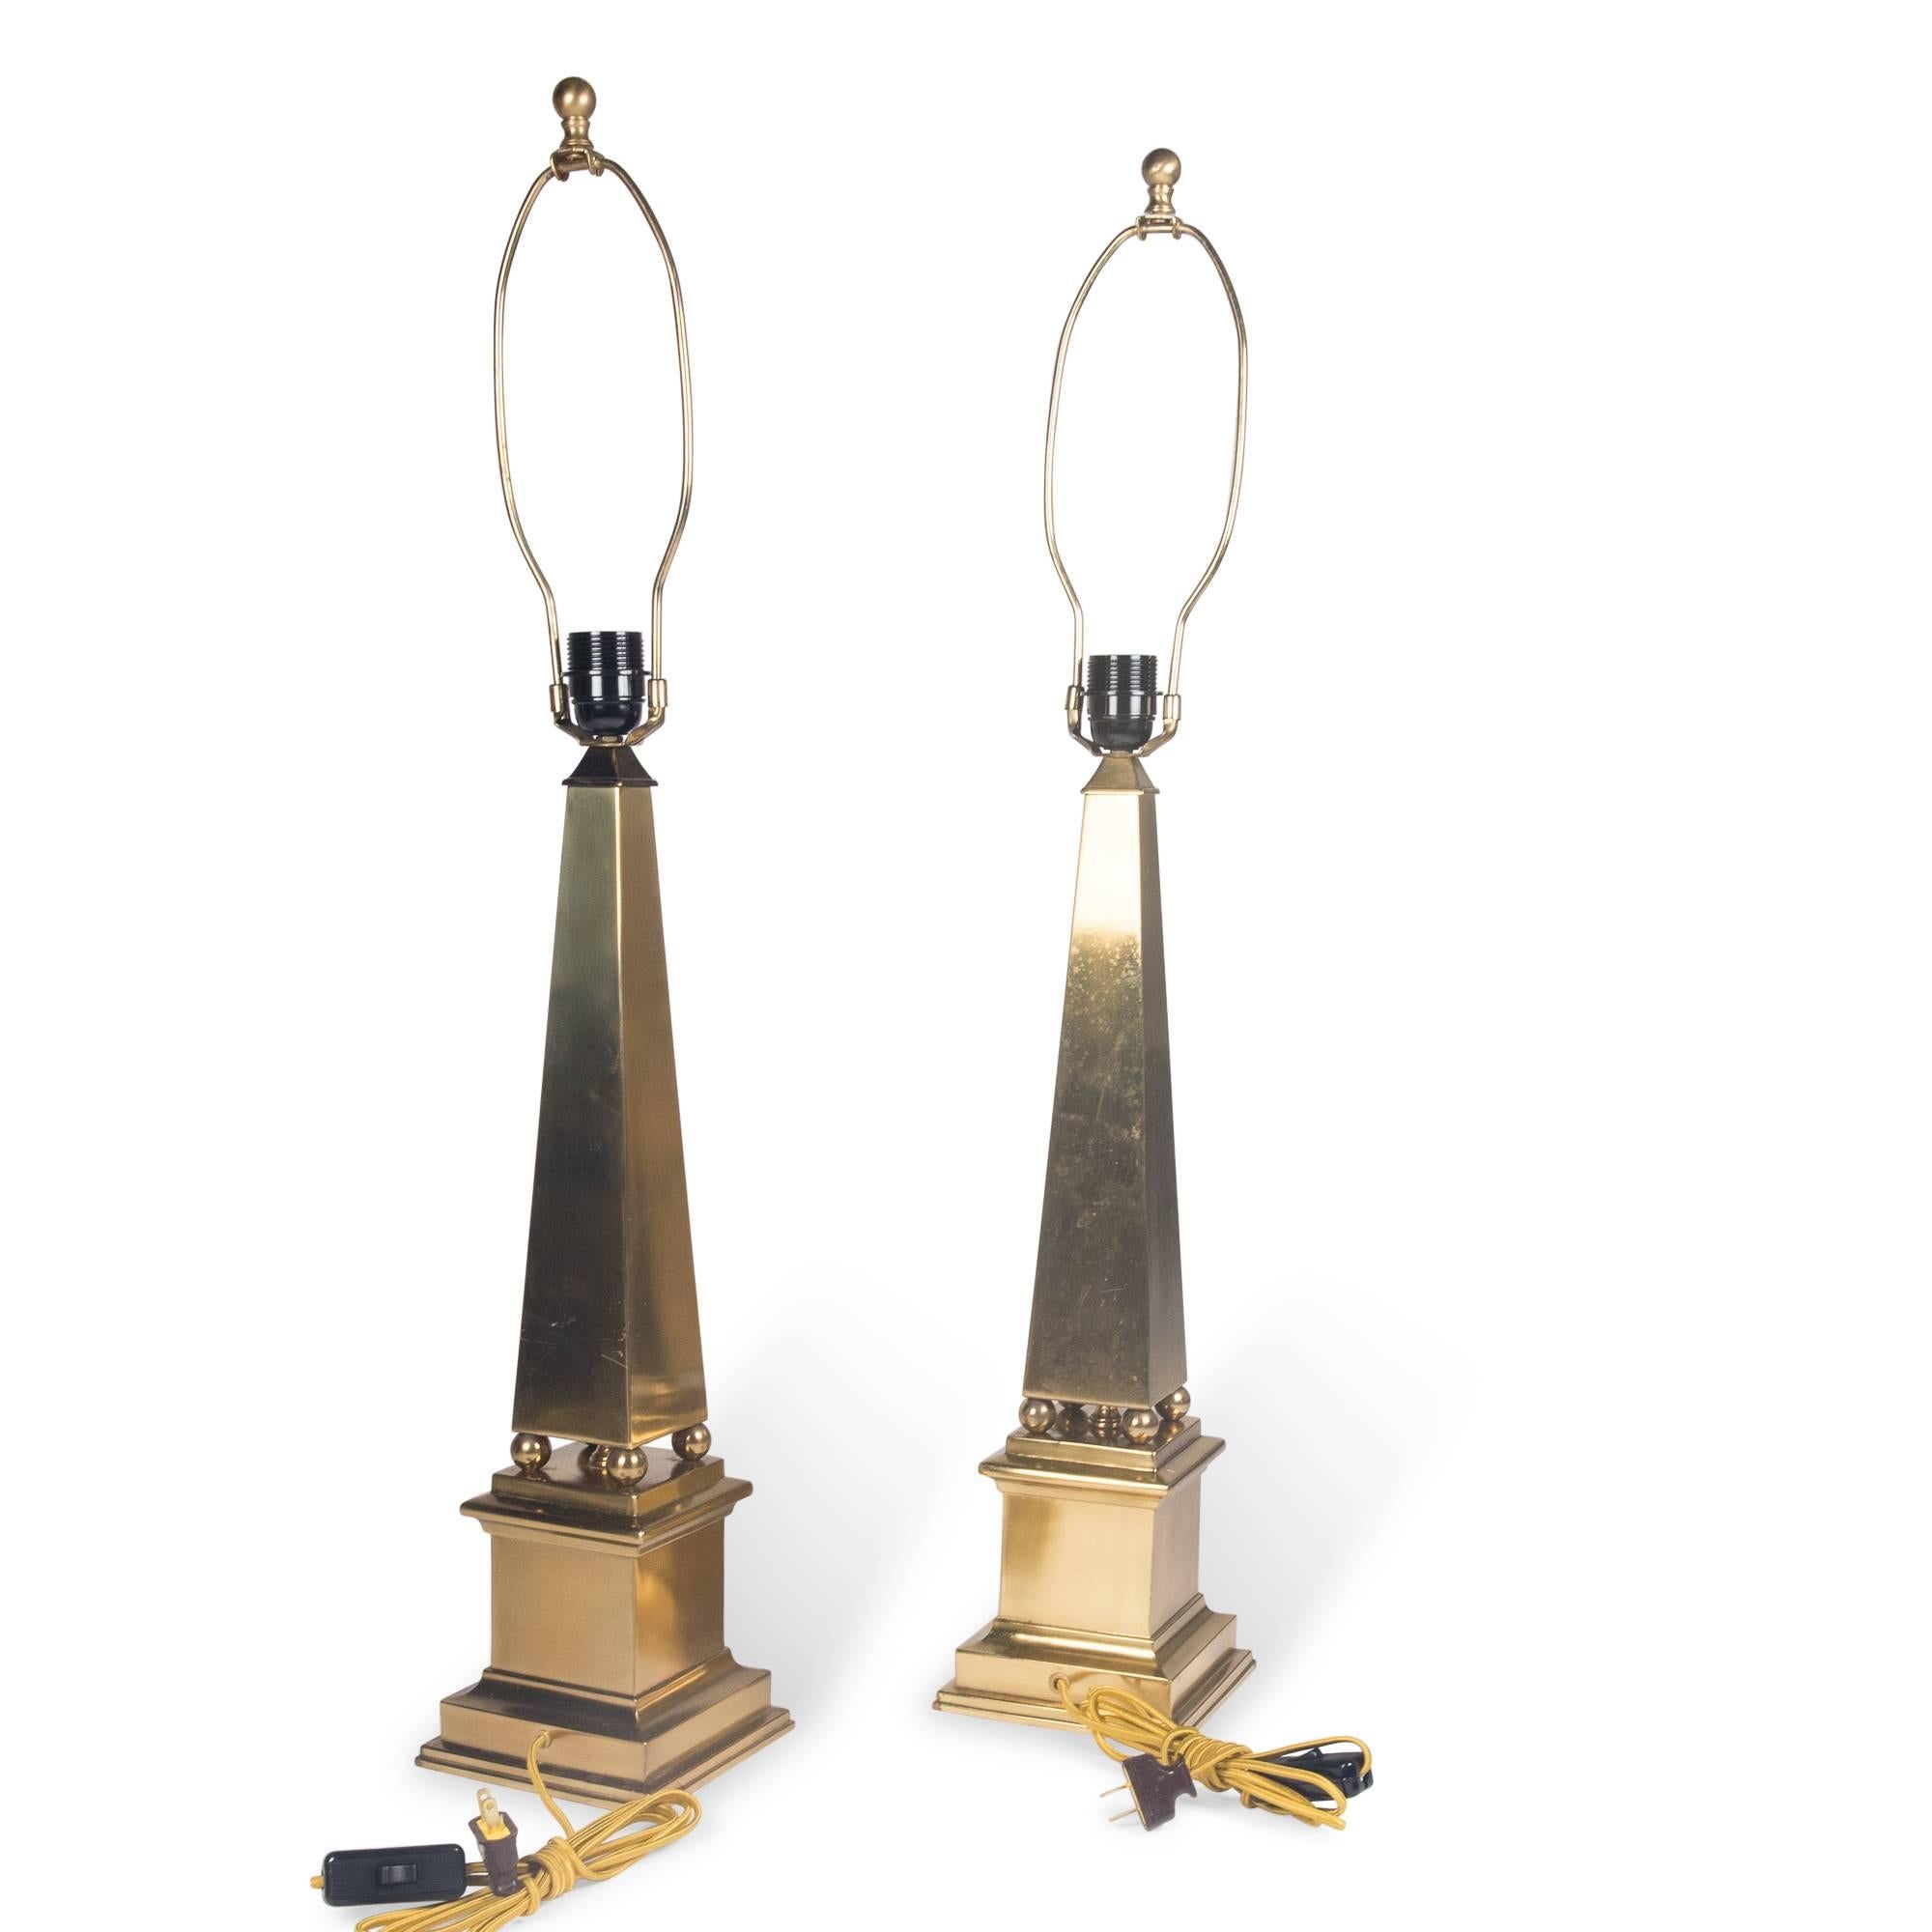 Mid-20th Century Brass Obelisk Table Lamps by Marbro, American, 1960s